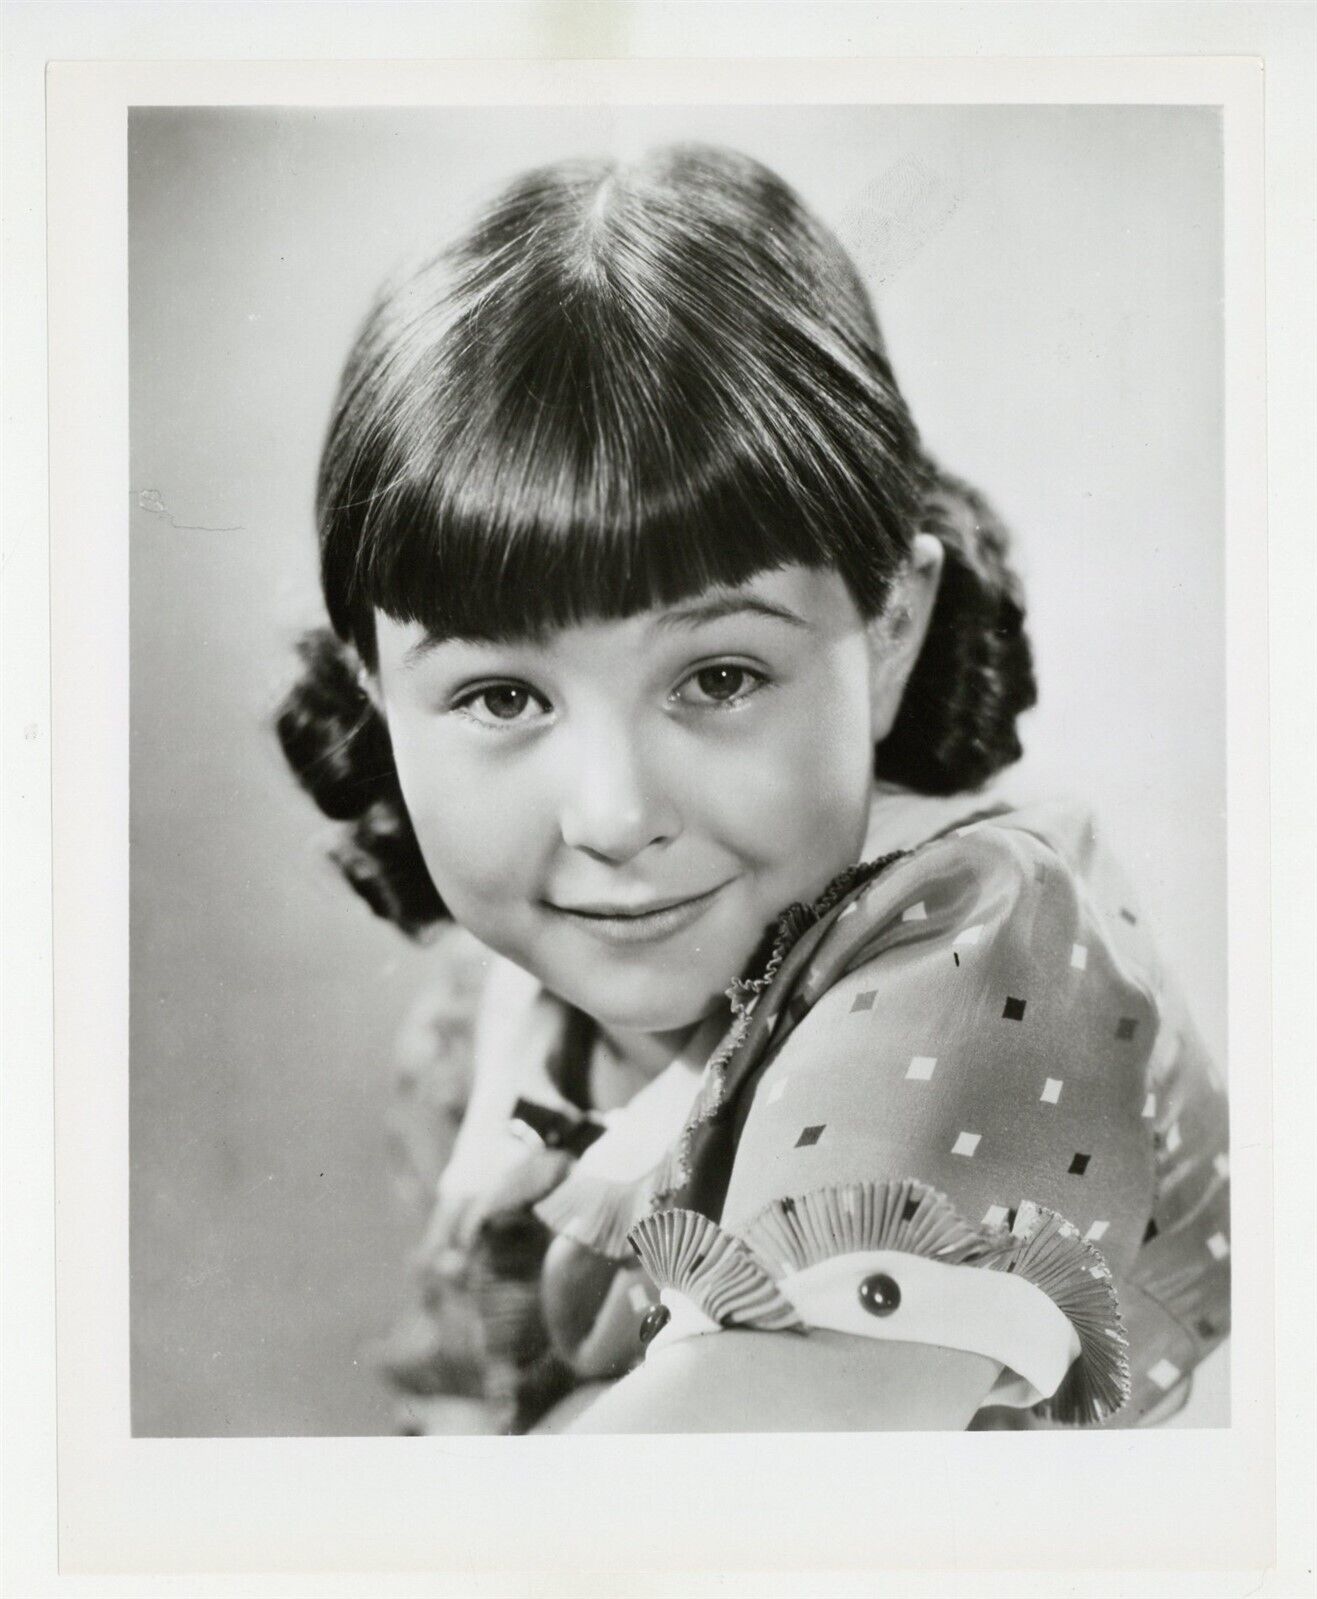 Jane Withers 1940 Young Child Actor Portrait 8x10 Glamour Photo 20th Century Fox